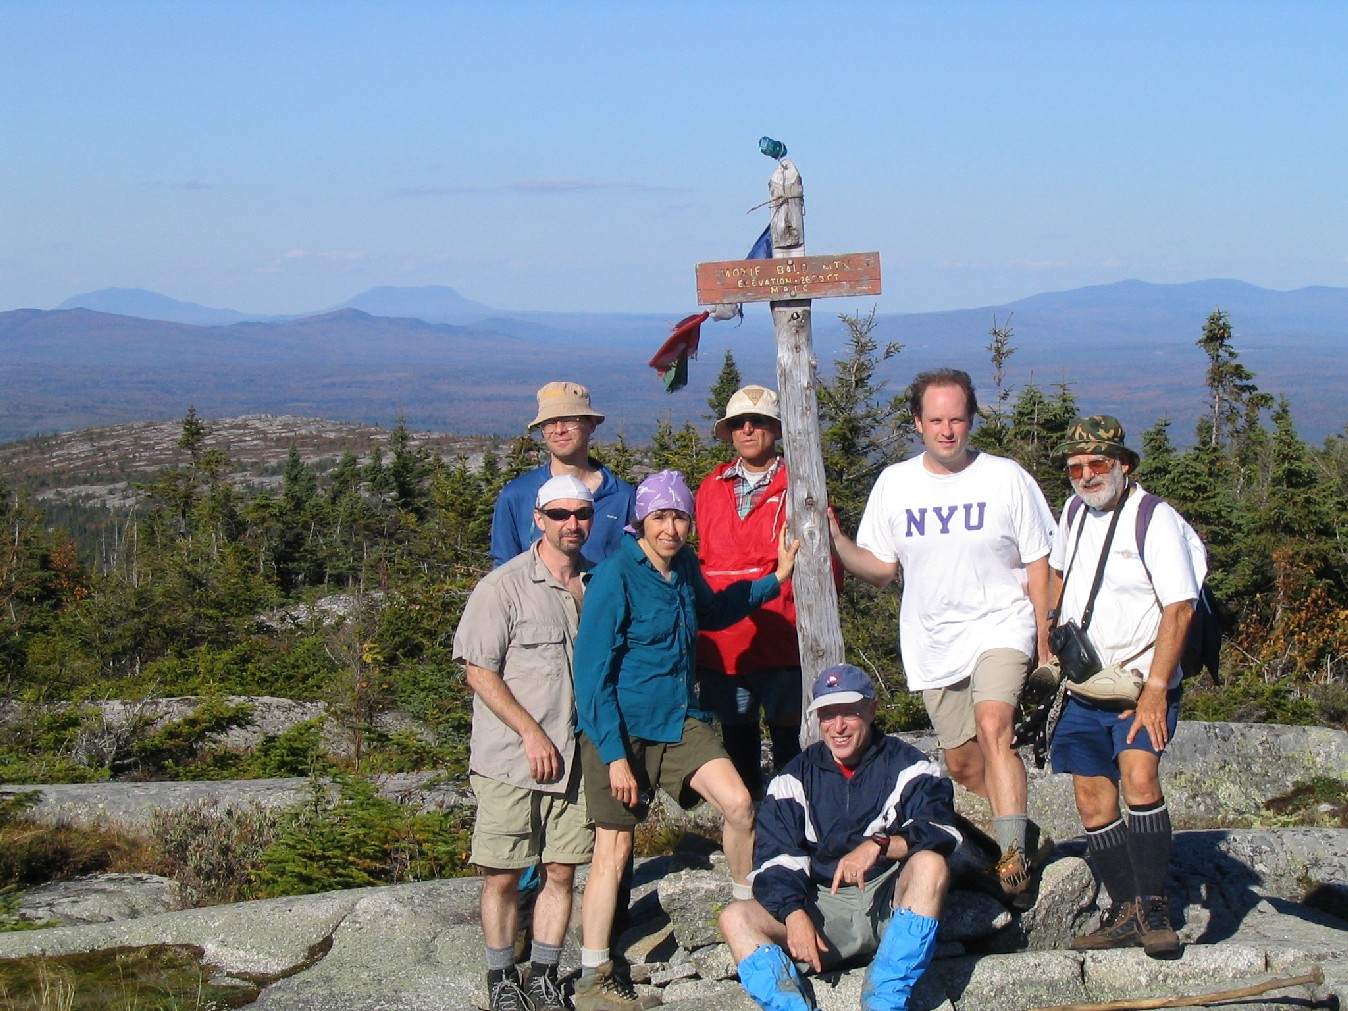 20.0 MM. The summit of Moxie Bald, is the highest point in this section at 2,629 feet. On a clear day like the one pictured you can still see Mt. Katahdin and North Brother Mountain to the north. Here is our group photo including Chris, Dave, Veronica, Ludwig, Aaron, Josh and Dean. Courtesy askus3@optonline.net